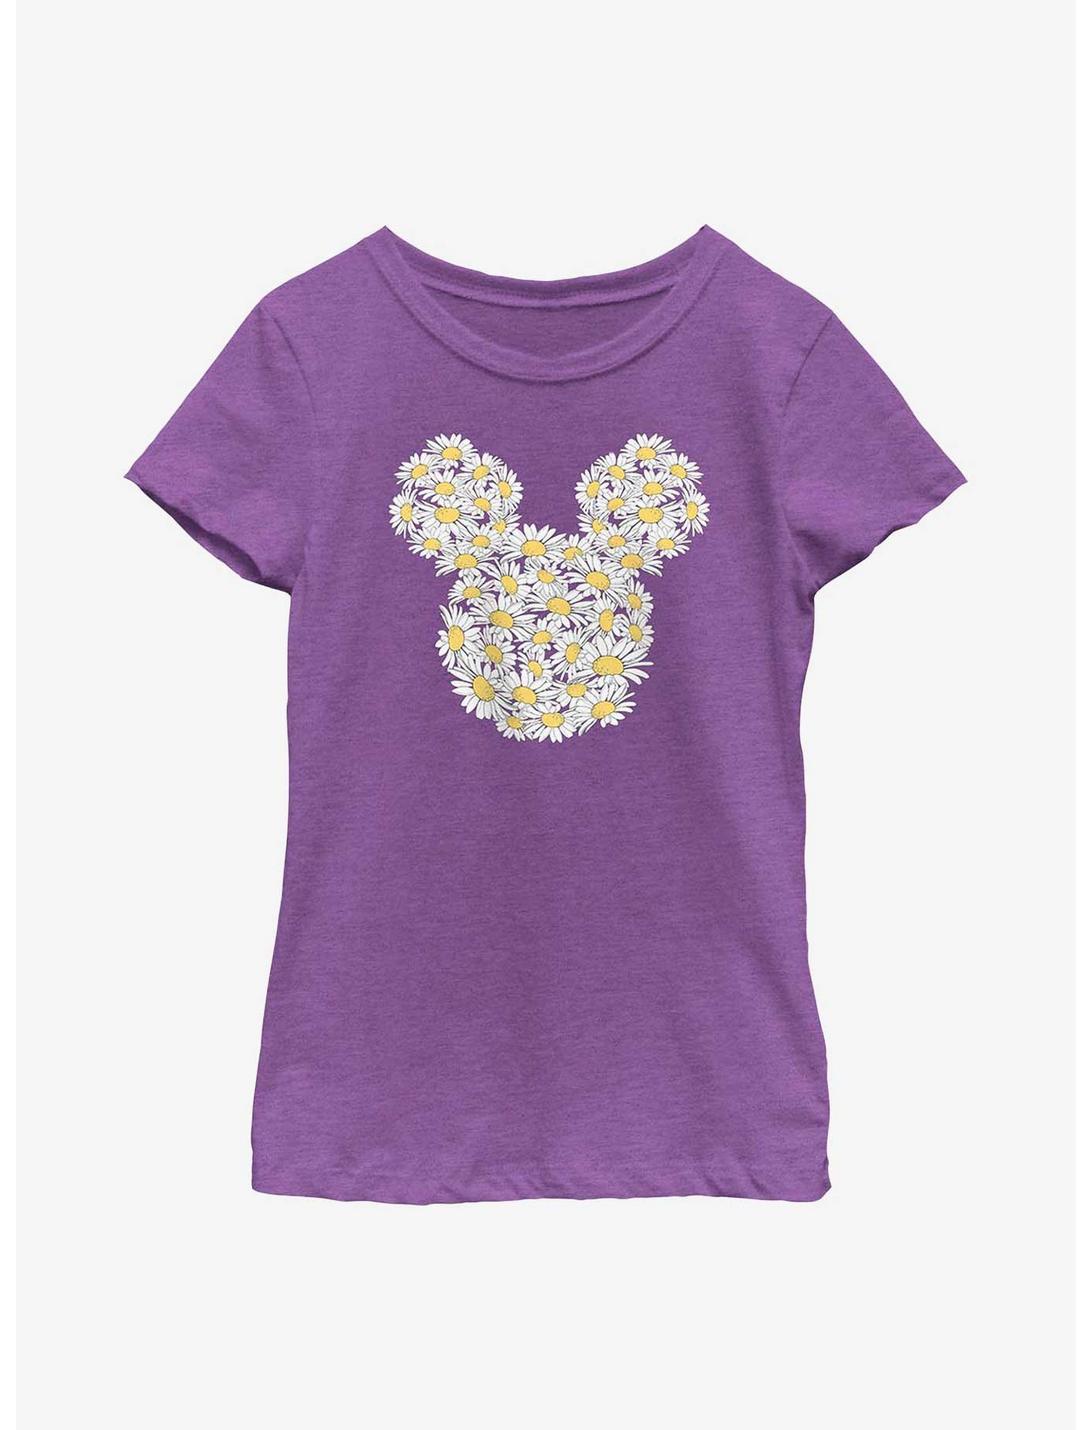 Plus Size Disney Mickey Mouse Daisy Flower Fill Youth Girls T-Shirt, PURPLE BERRY, hi-res